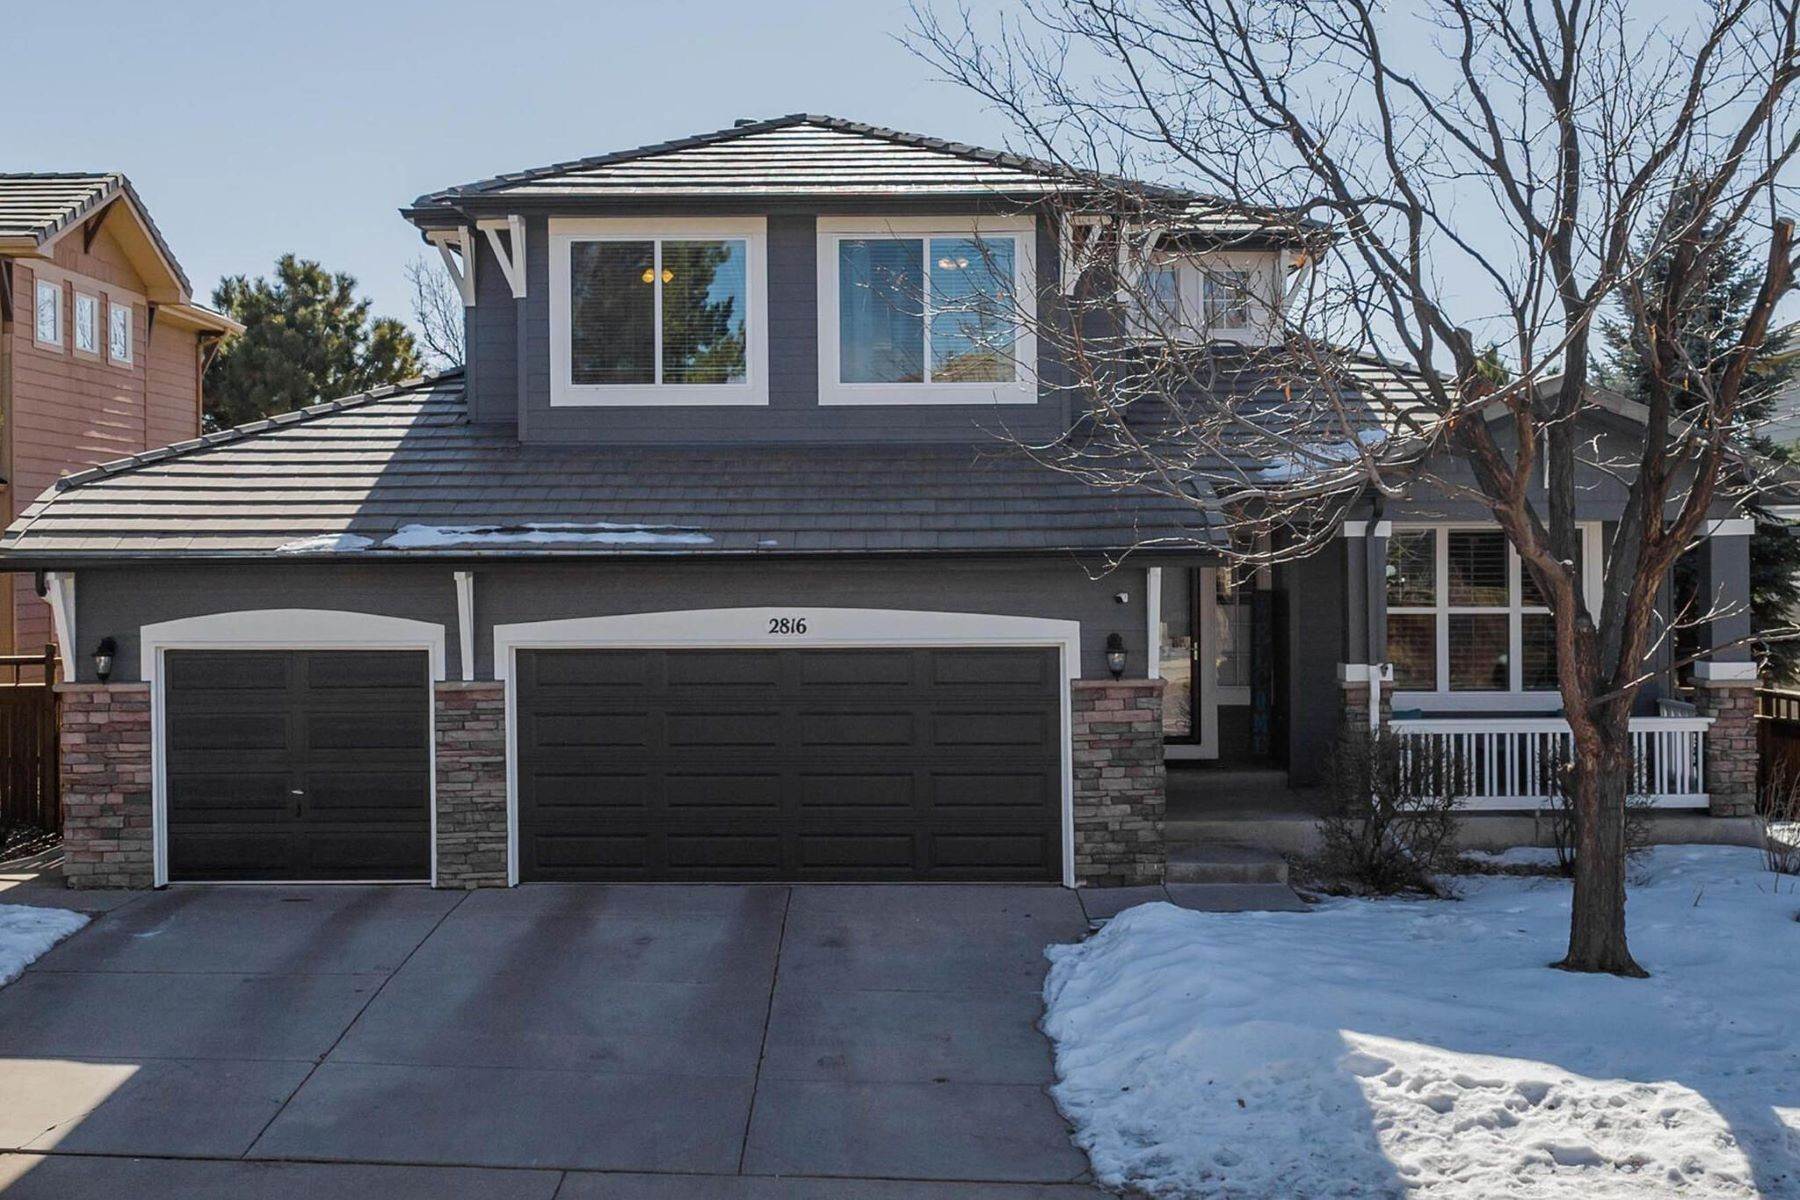 Single Family Homes for Active at Rare opportunity to own a Designer’s Dream home 2816 Greensborough Drive Highlands Ranch, Colorado 80129 United States